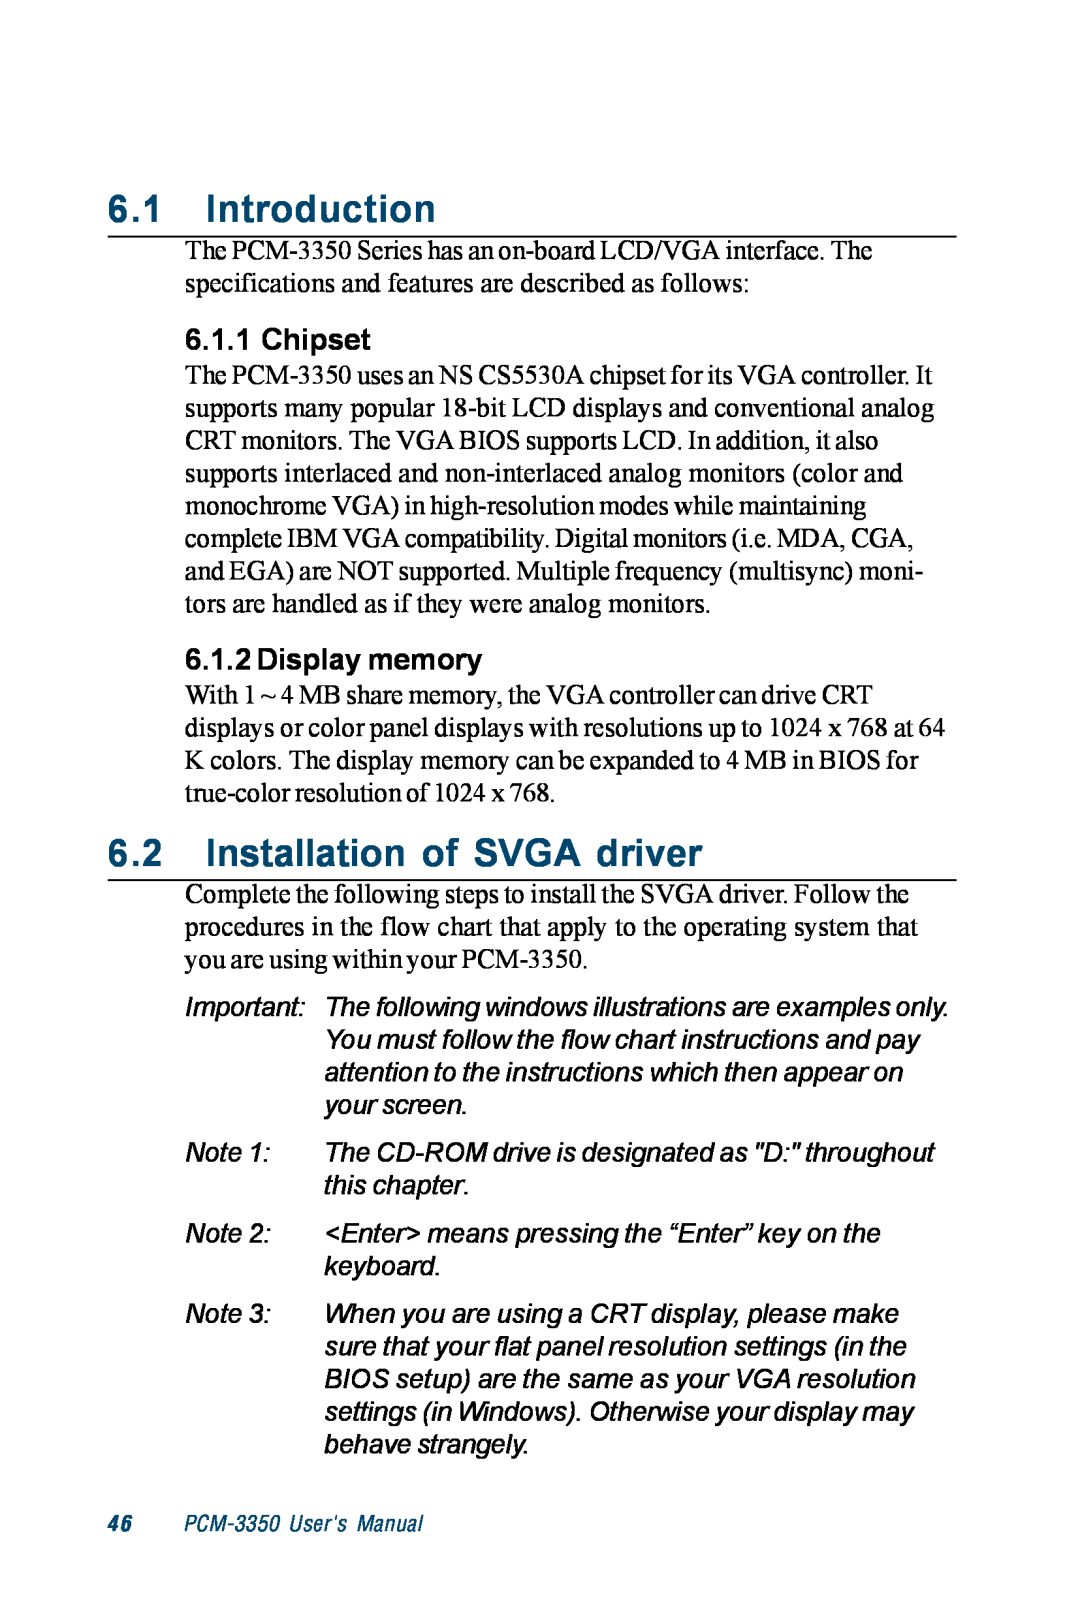 Advantech PCM-3350 Series user manual Introduction, Installation of SVGA driver, Chipset, Display memory 